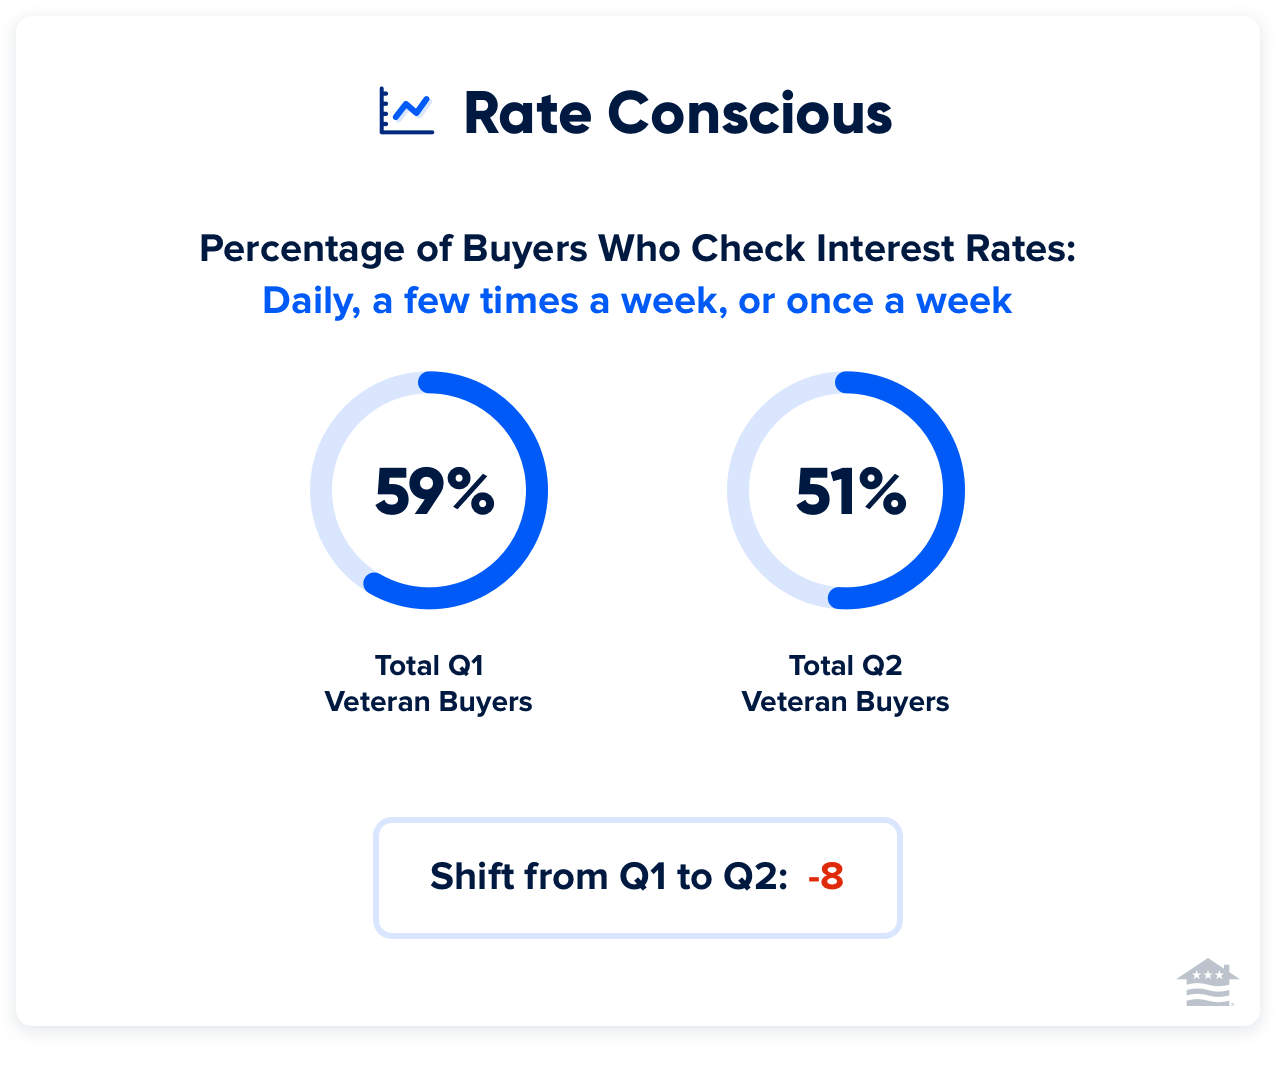 Percentage of Buyers Who Check Interest Rates at Least Once a Week